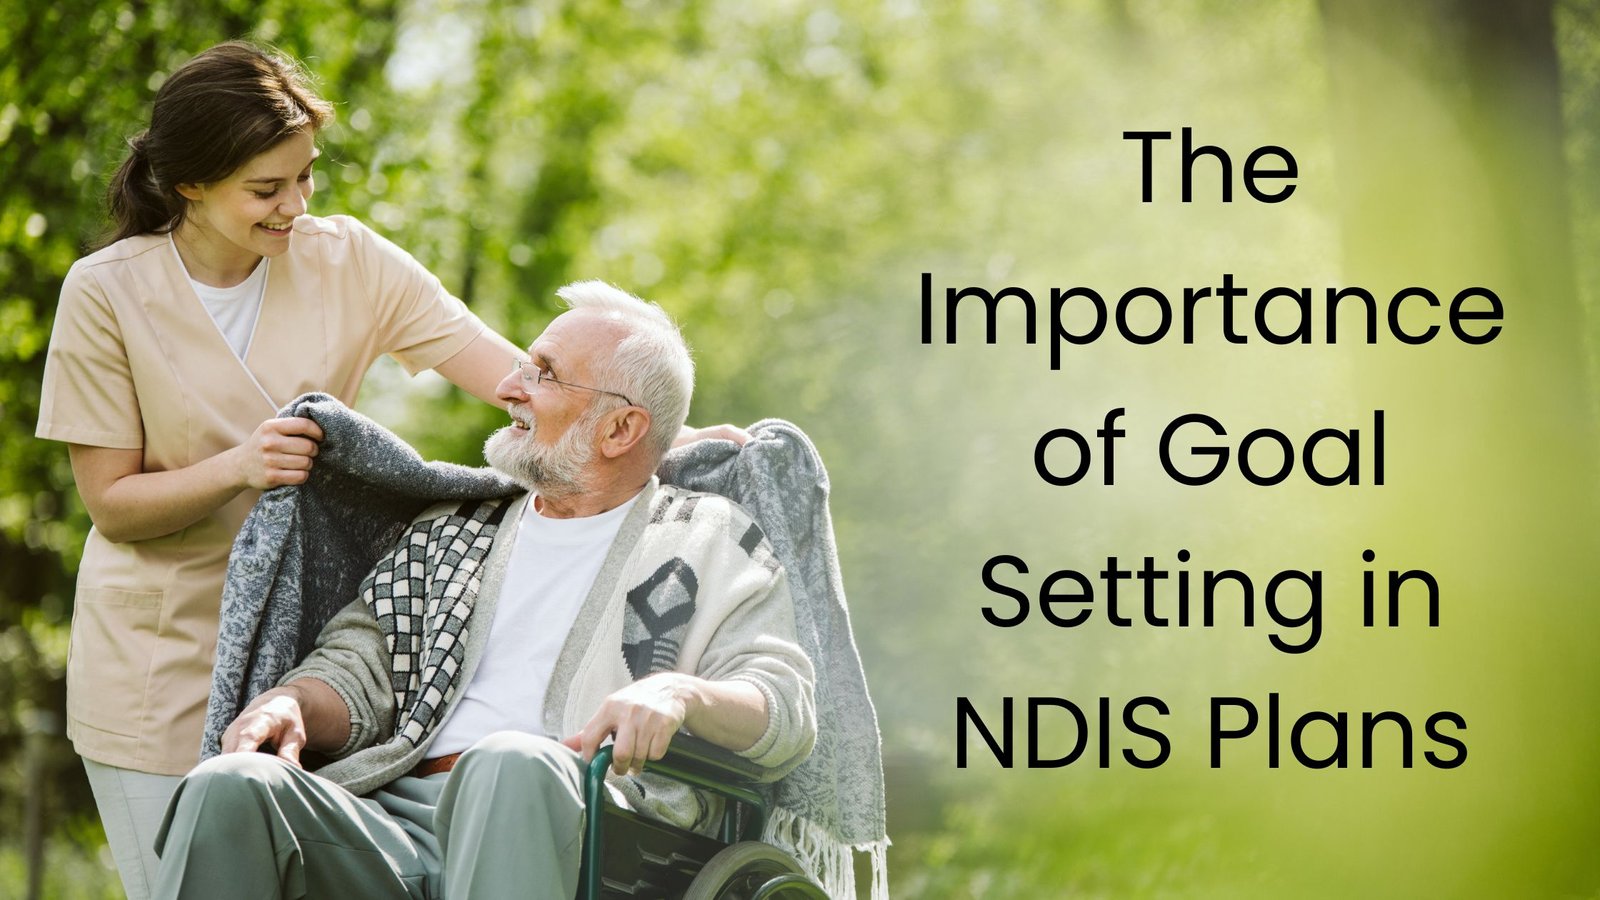 The Importance of Goal Setting in NDIS Plans